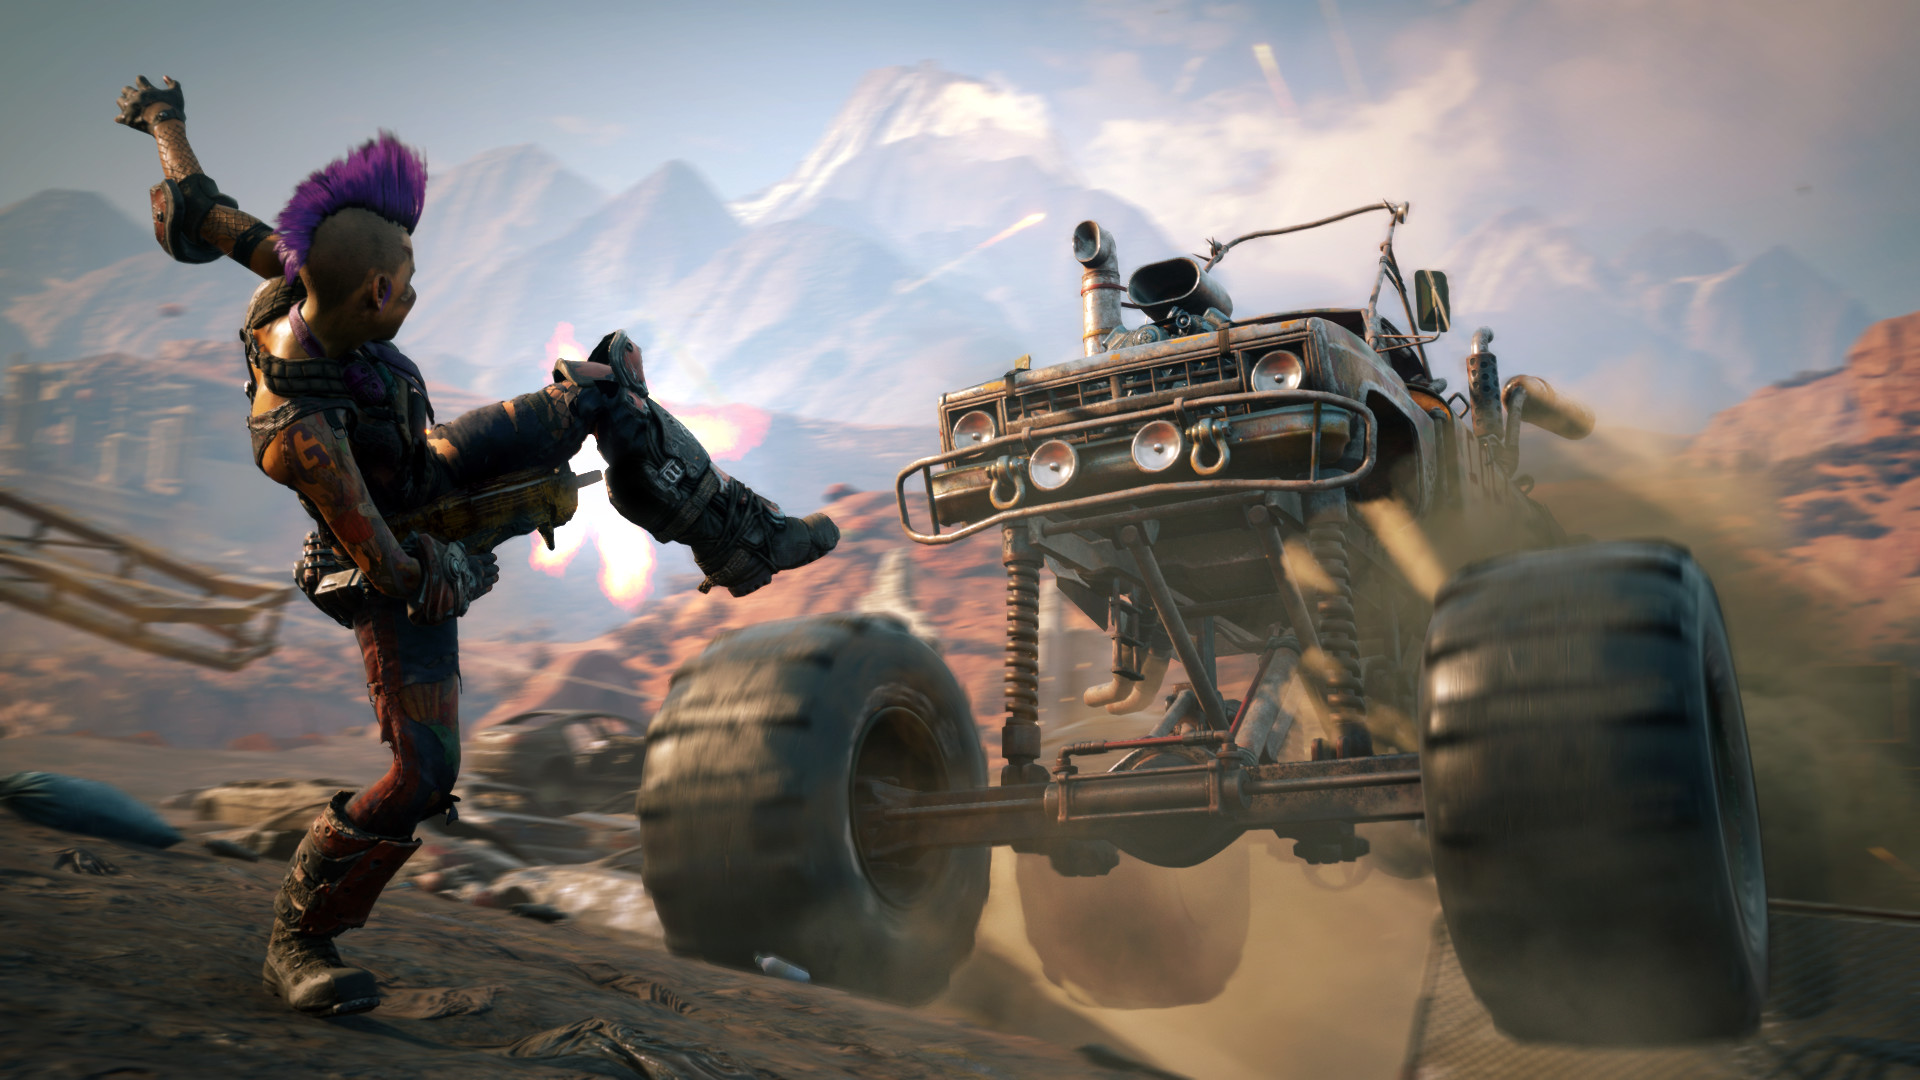 RAGE 2 - Deluxe Edition Pack DLC Steam CD Key, $10.16